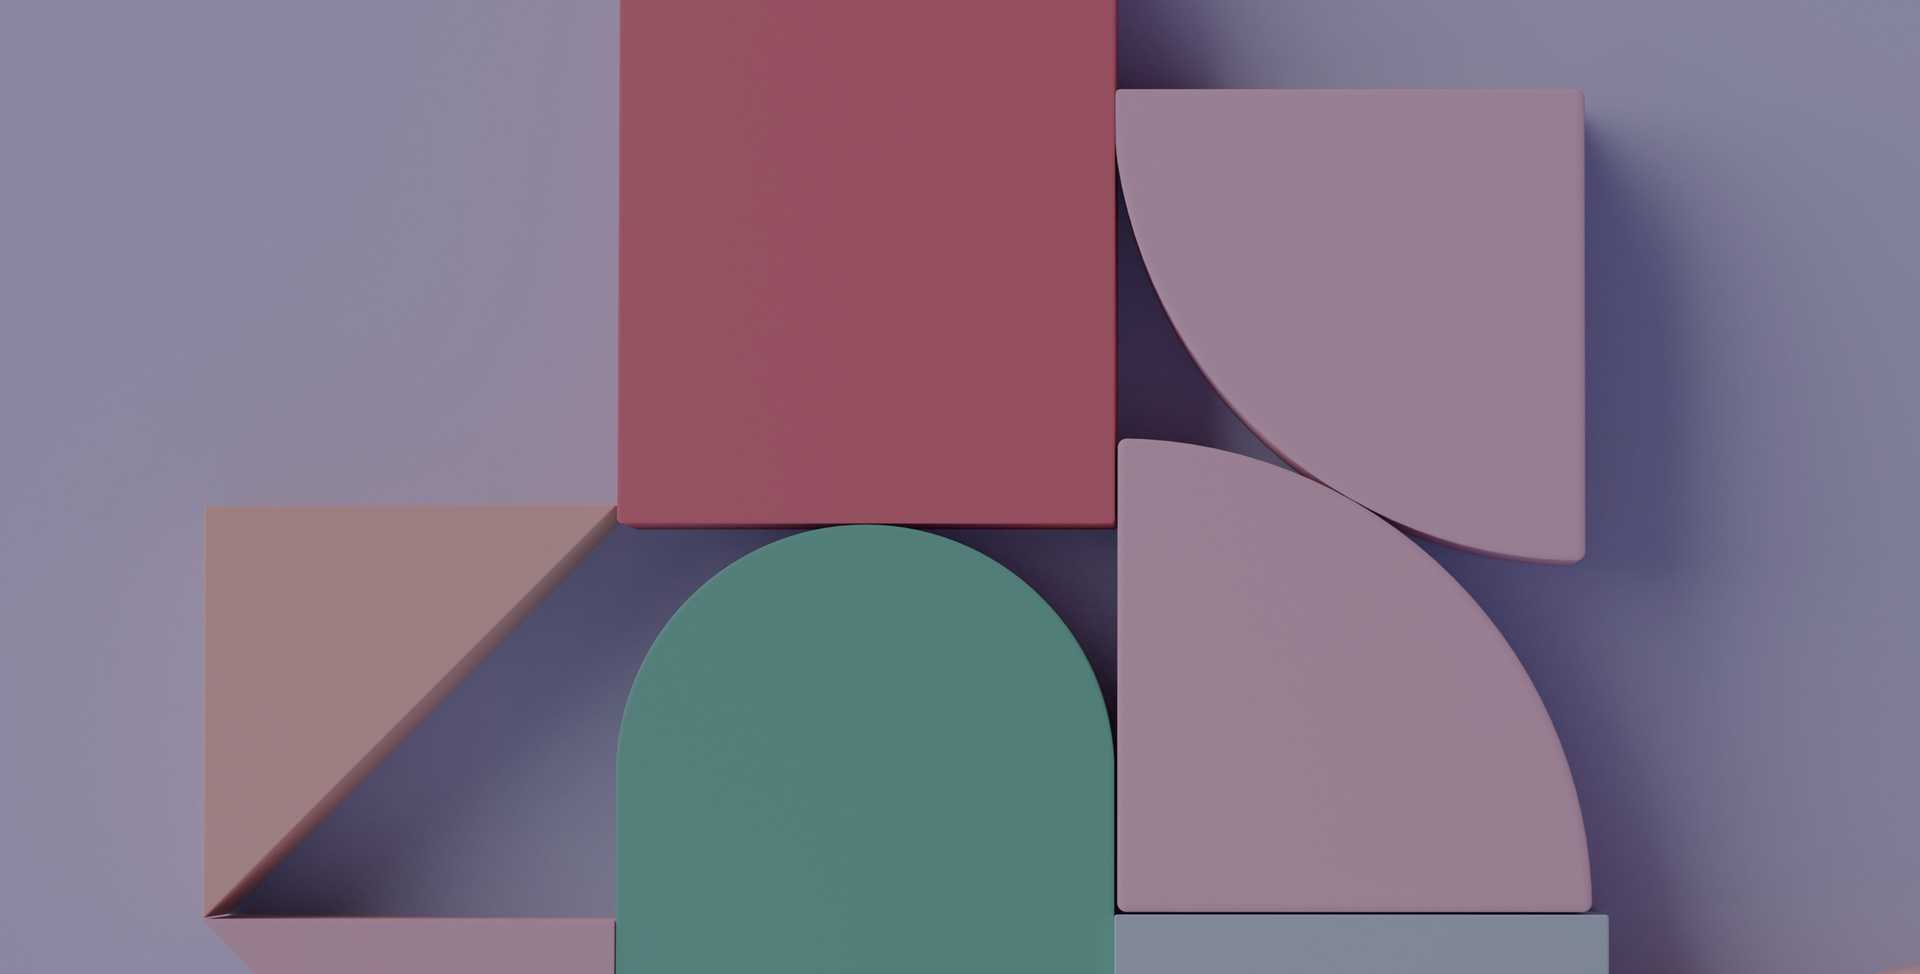 3D rendering of pink, green, and purple shapes against a light purple background